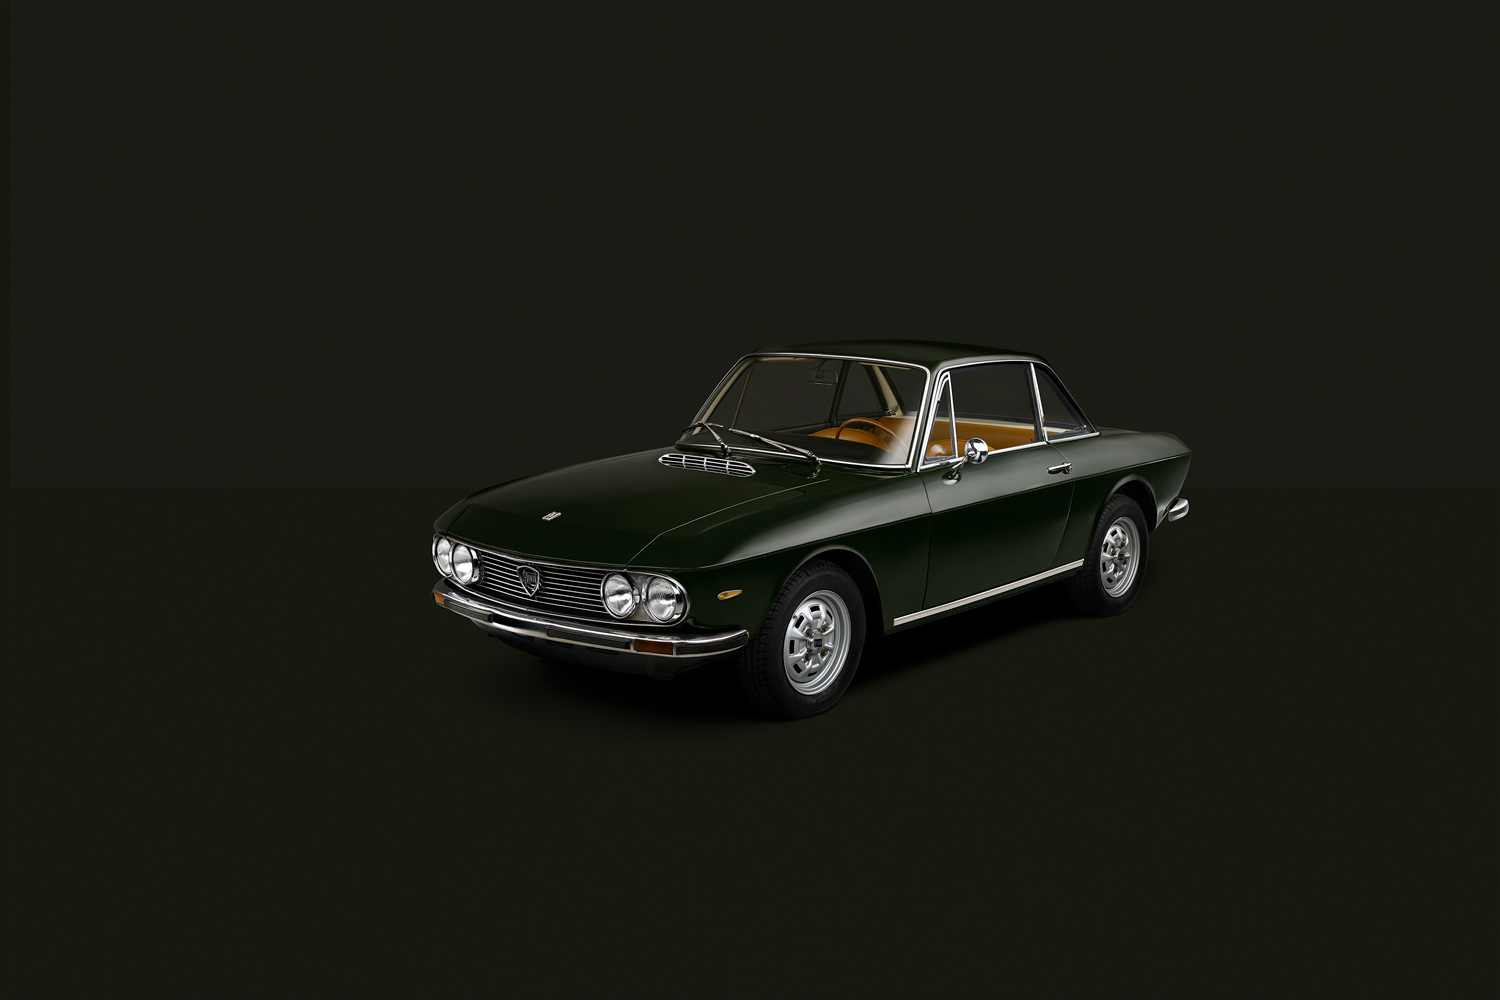 Approach_Retouch_London_Lancia_Fulvia_Tipo_818_Front